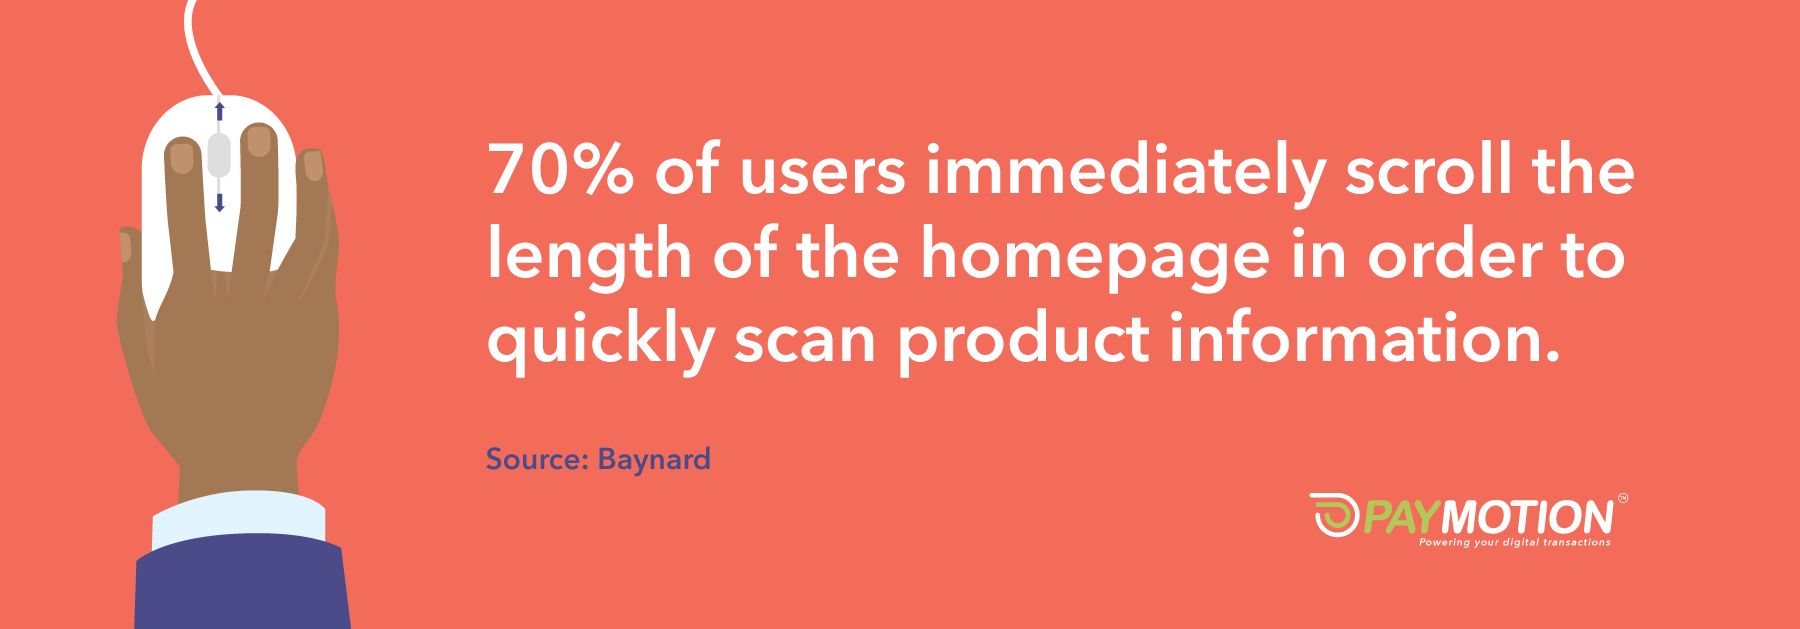 70% of users immediately scroll the length of the homepage in order to quickly scan the products.